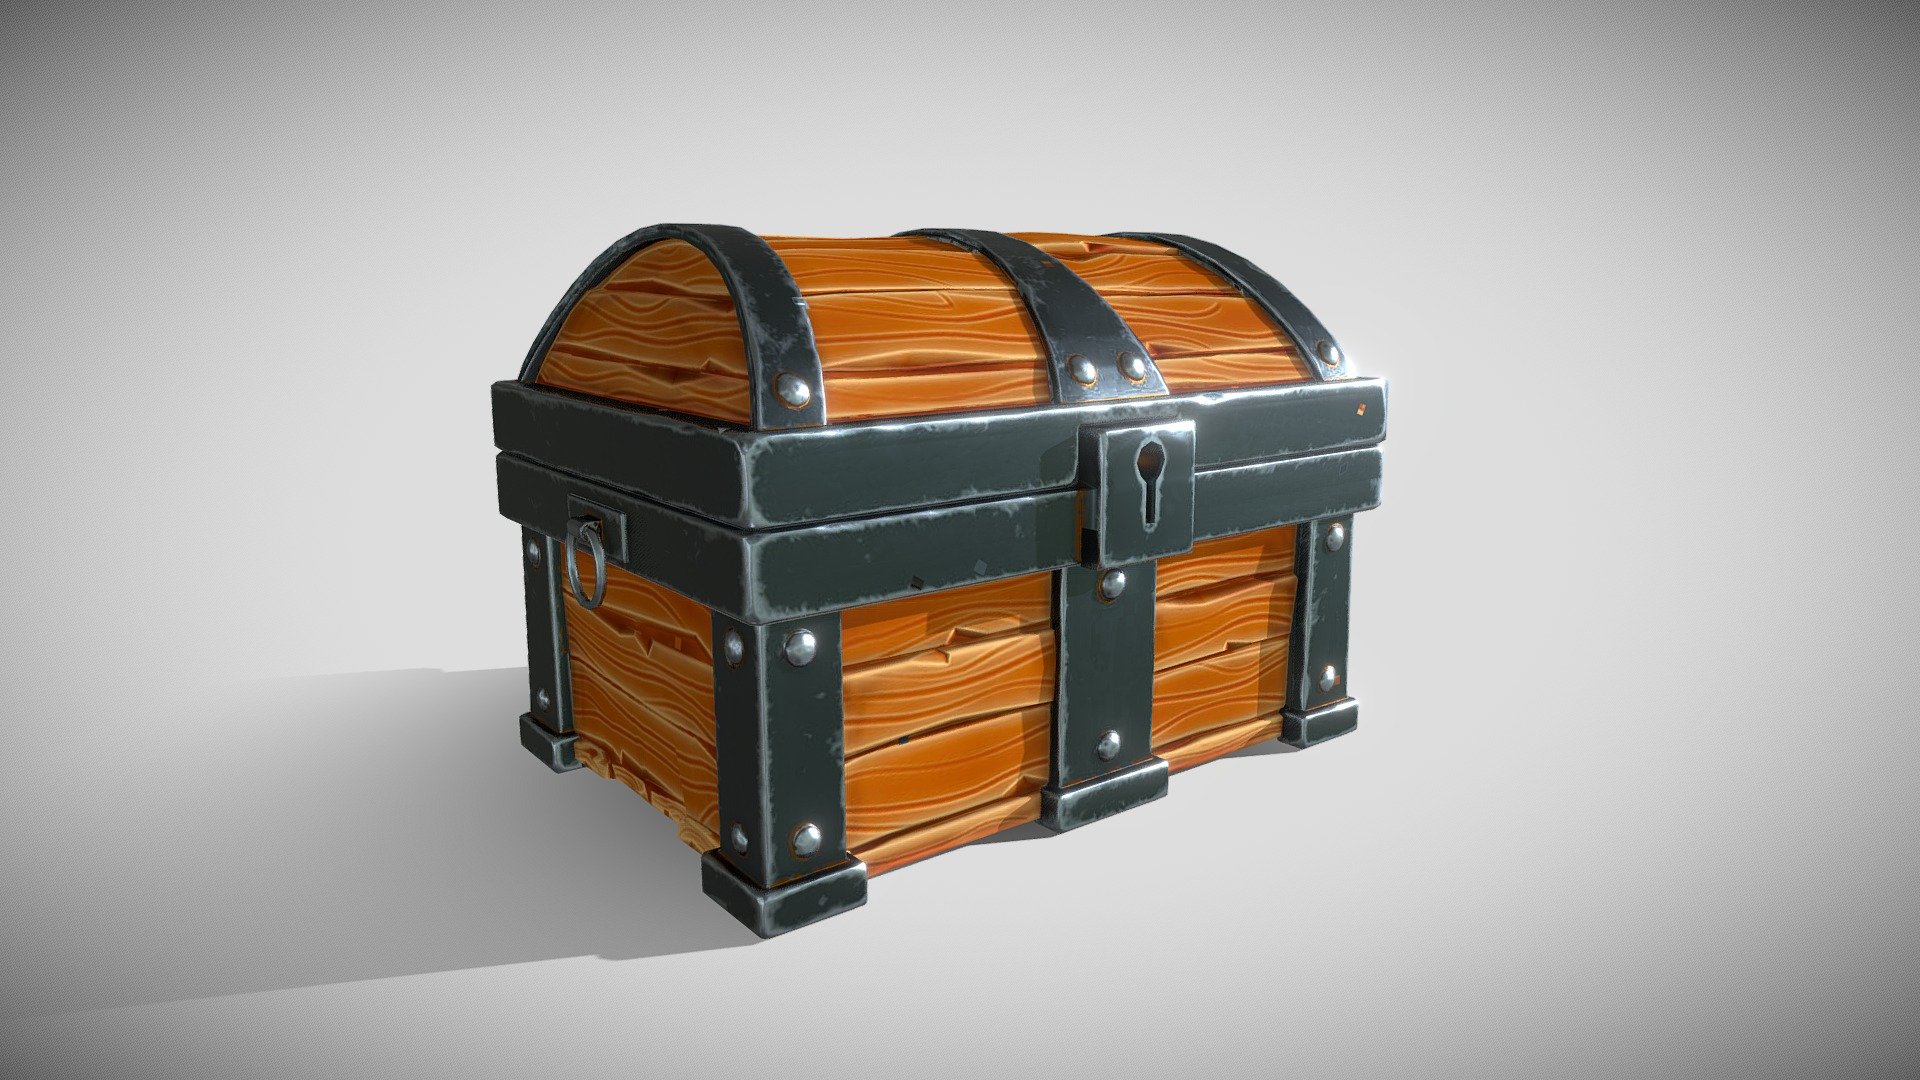 A small asset I made a while ago for the unity game engine 3d model